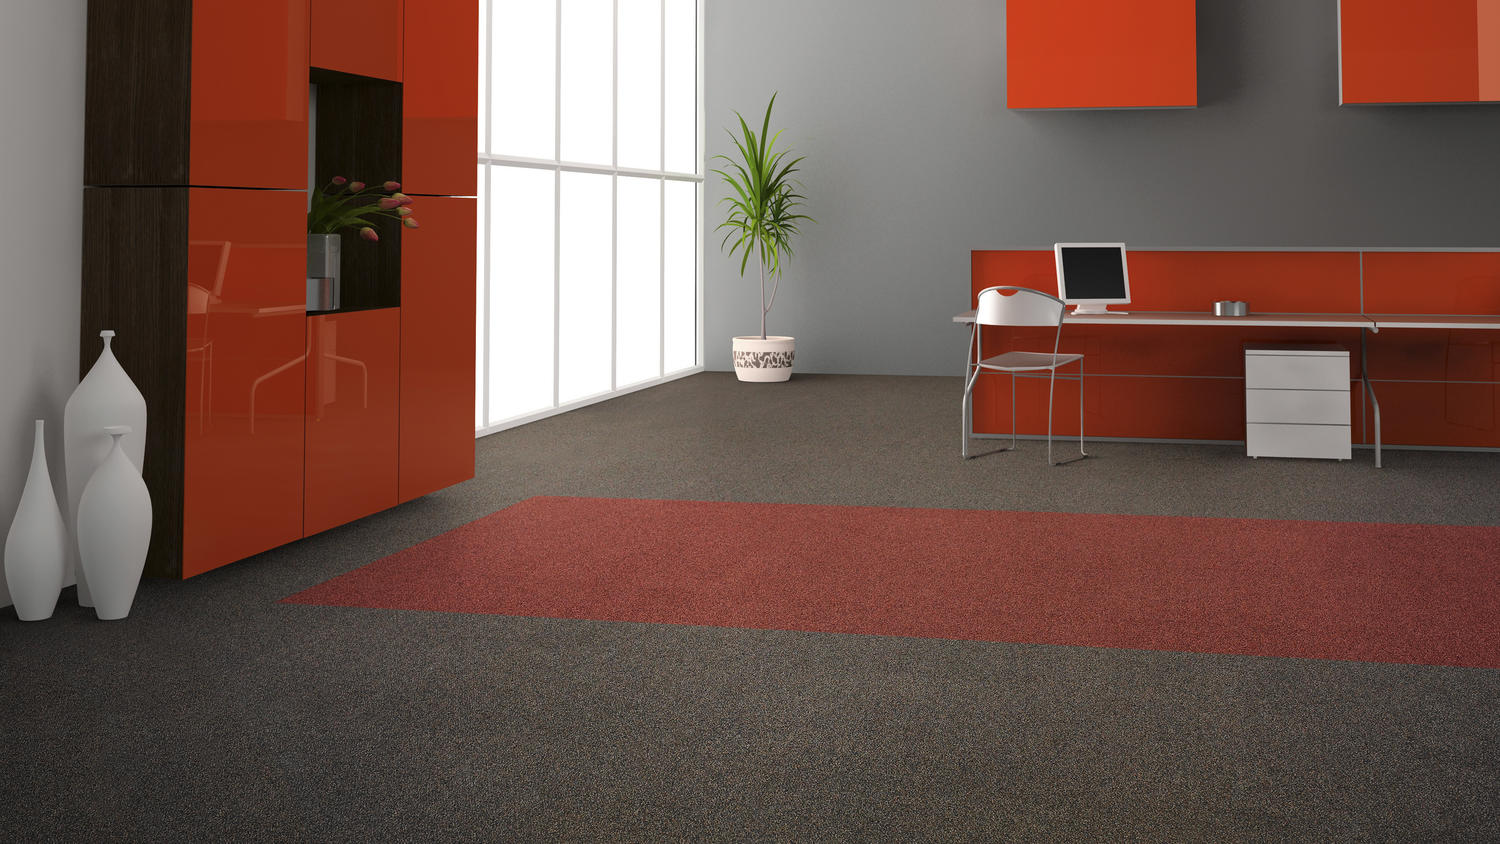 Display Storage, An Office Chair & Table Above Office Carpet Tiles